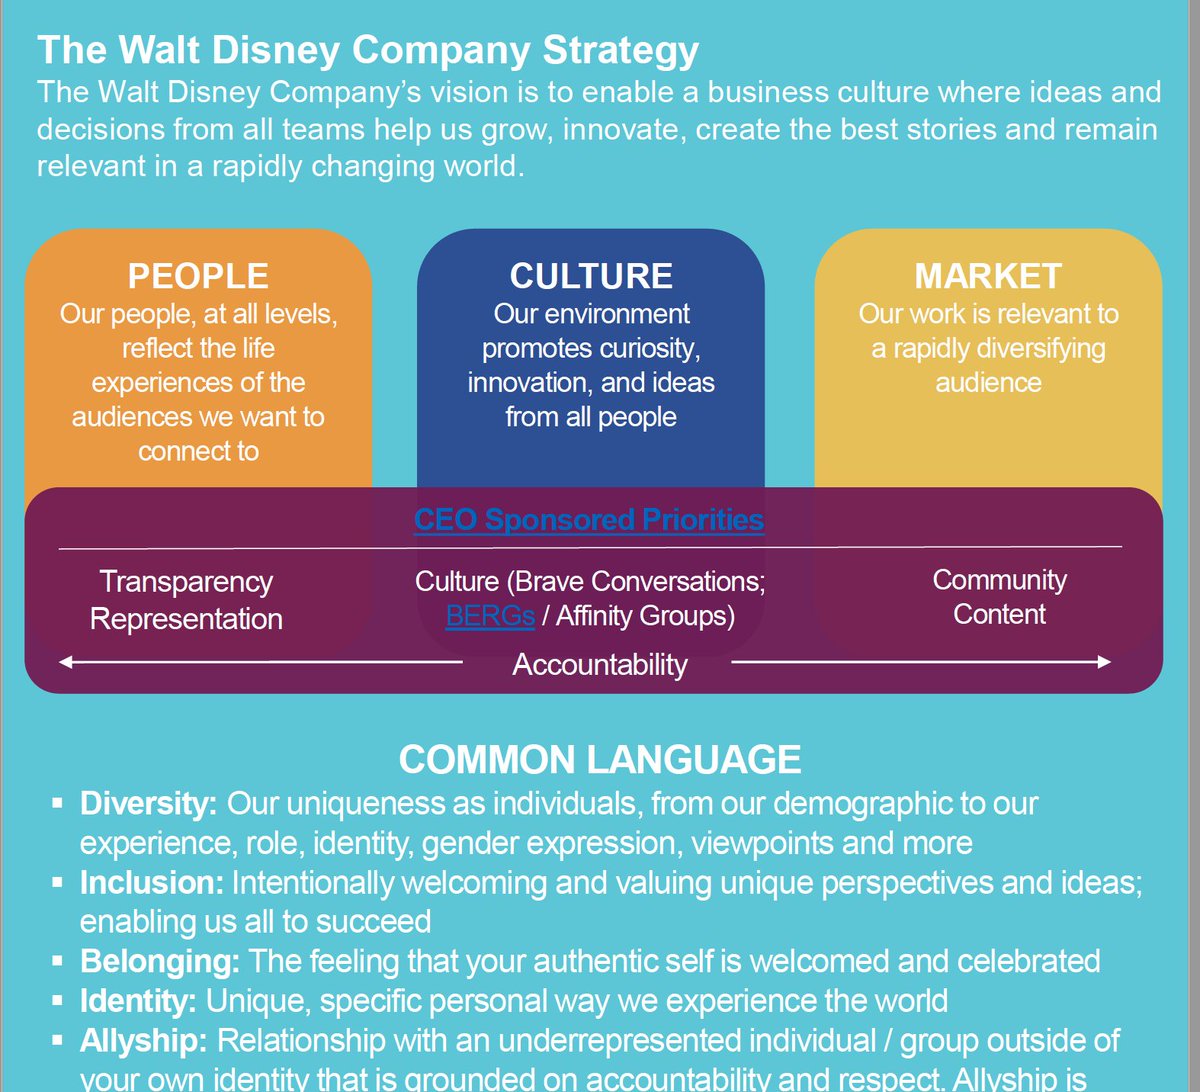 Finally, Disney has launched racially-segregated “affinity groups” for minority employees, with the goal of achieving “culturally-authentic insights.” The Latino group was named “Hola,” the Asian group was named “Compass,” and the black group was named “Wakanda.”